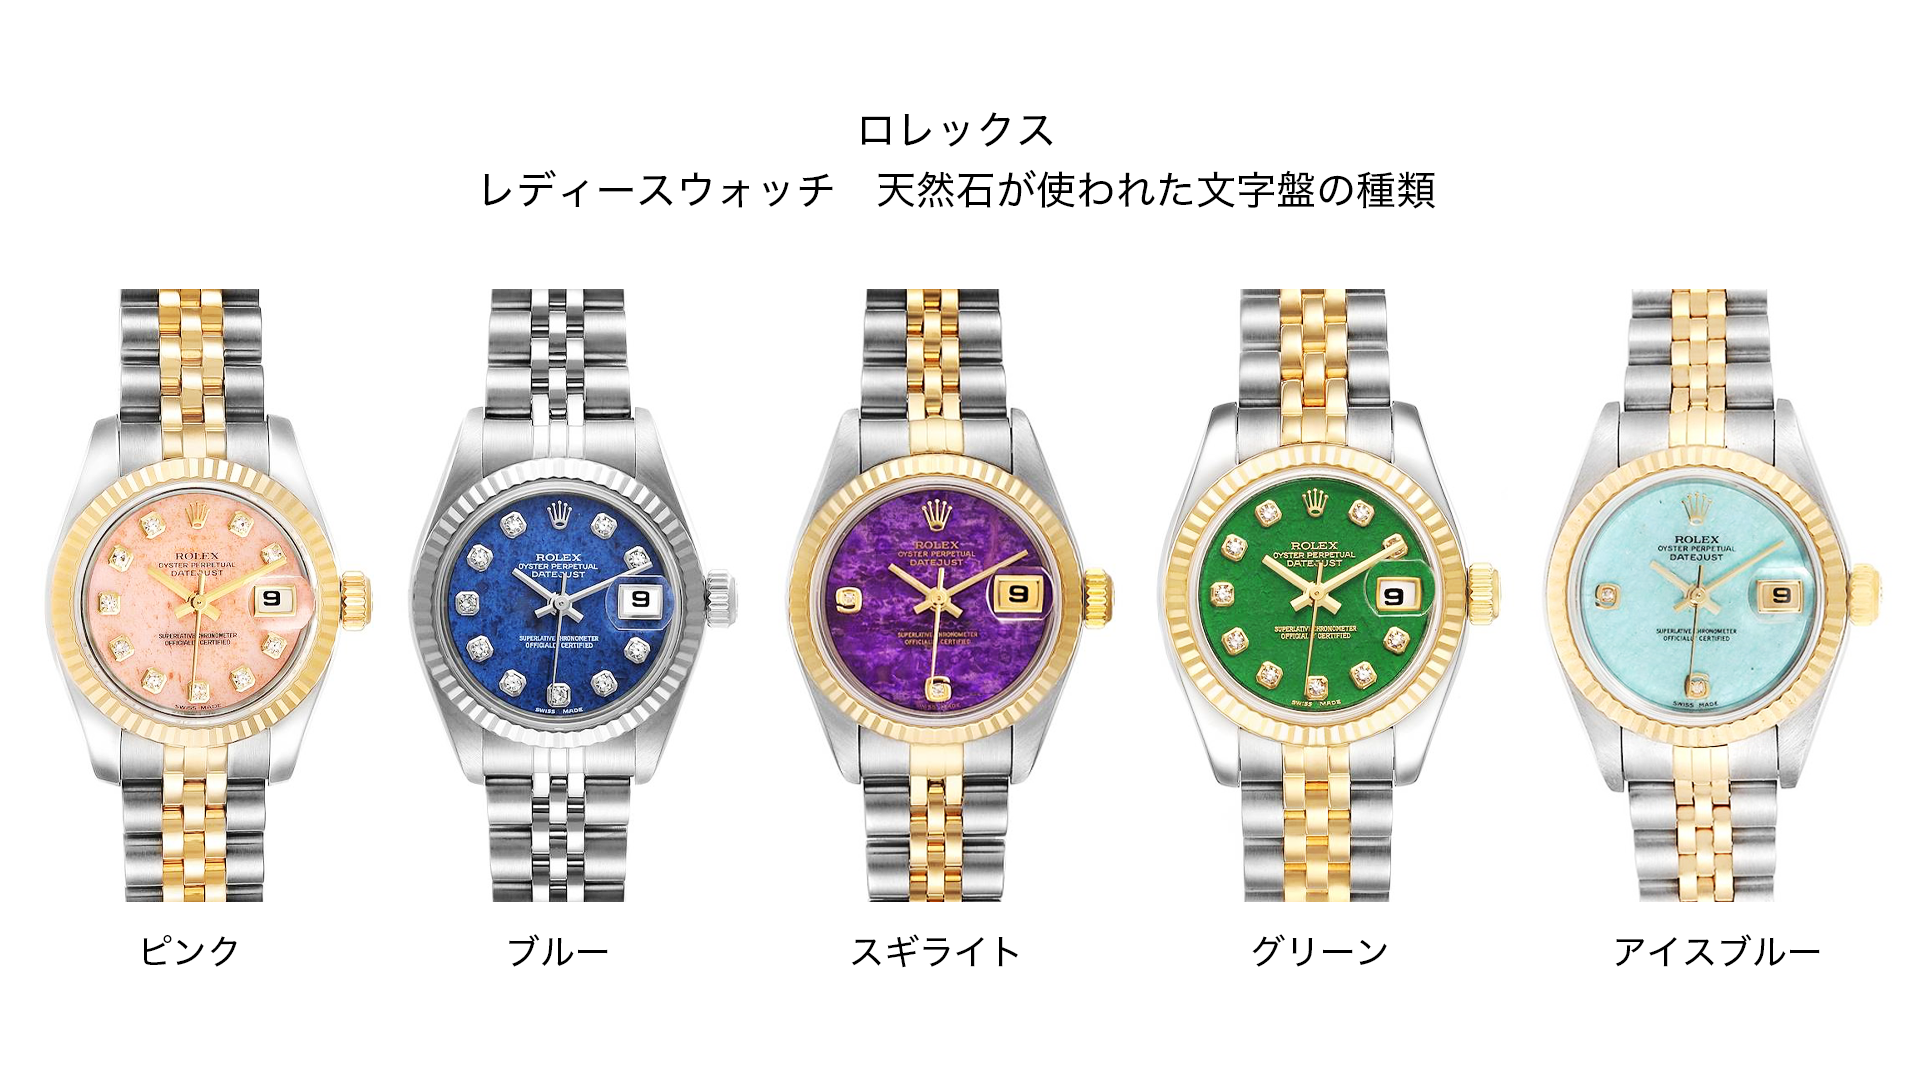 Rolex Ladies Watches - Types of Dials with Natural Stones